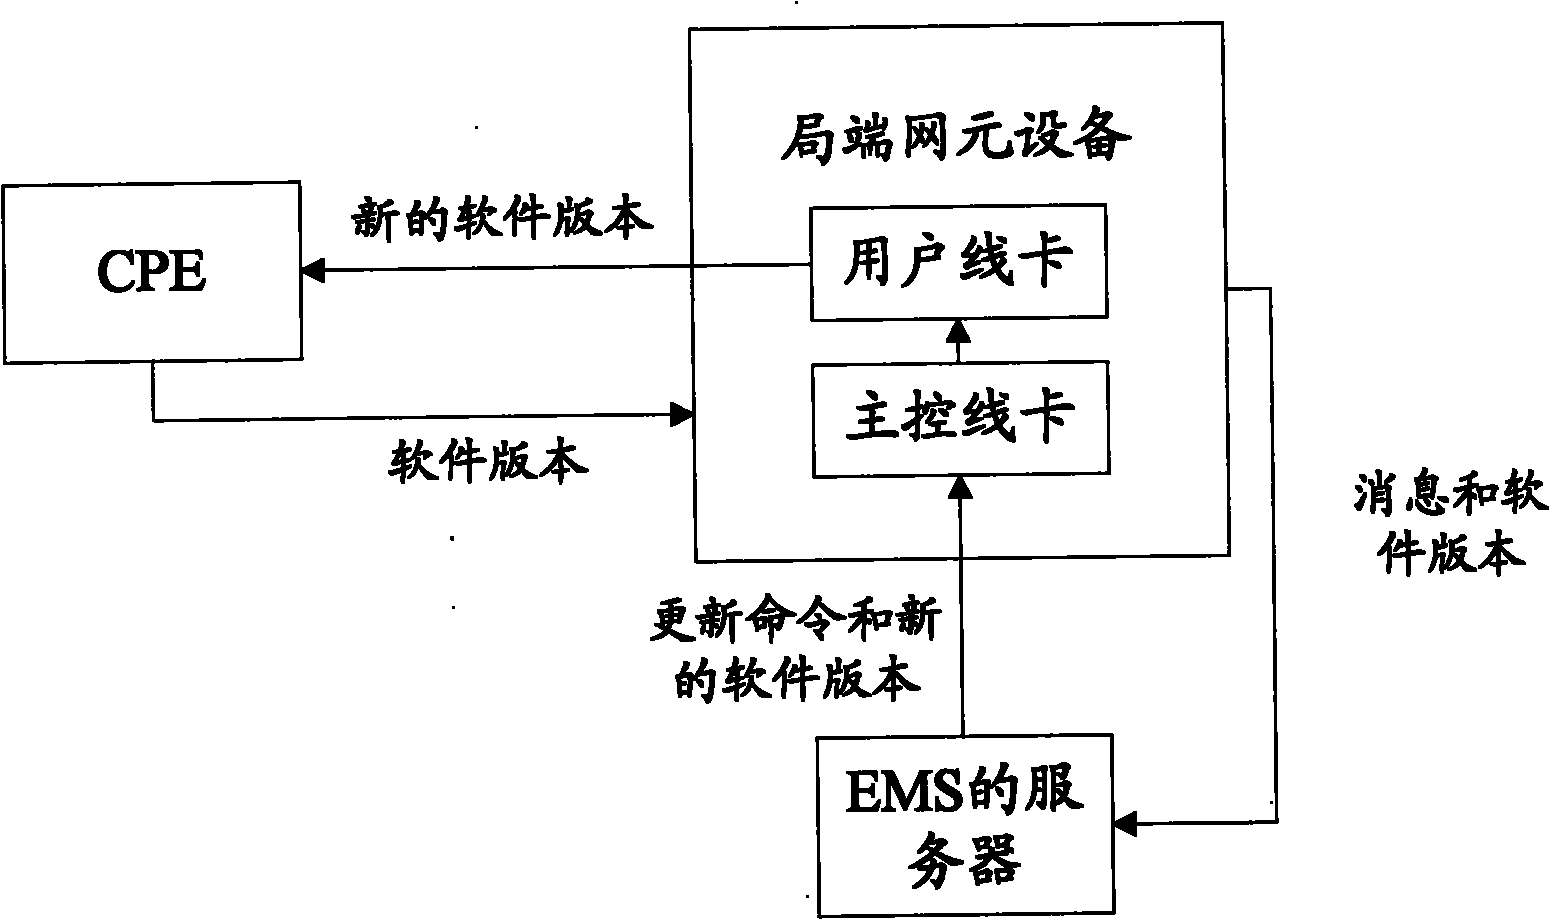 Method and system for updating software version automatically